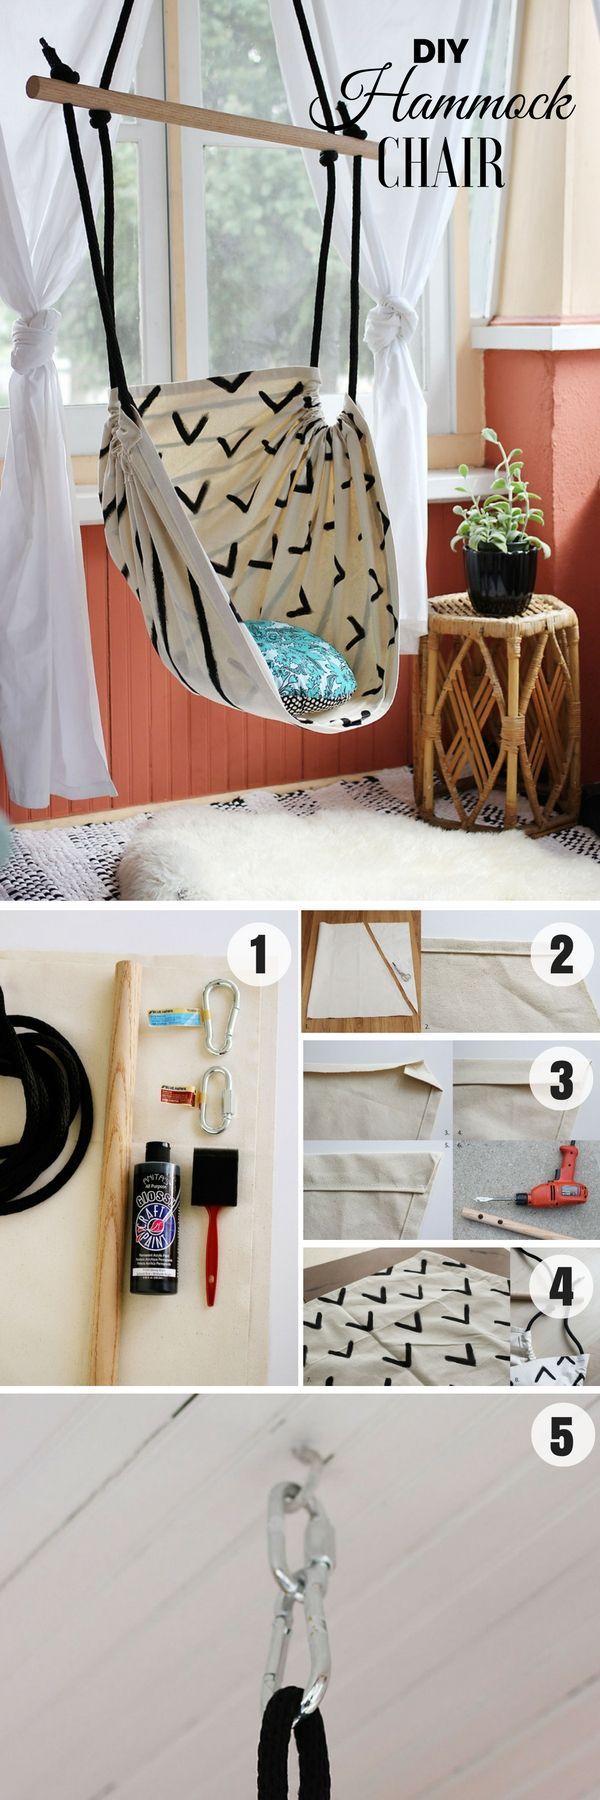 Check out how to make an easy DIY Hammock Chair for bedroom decor @istandarddesign